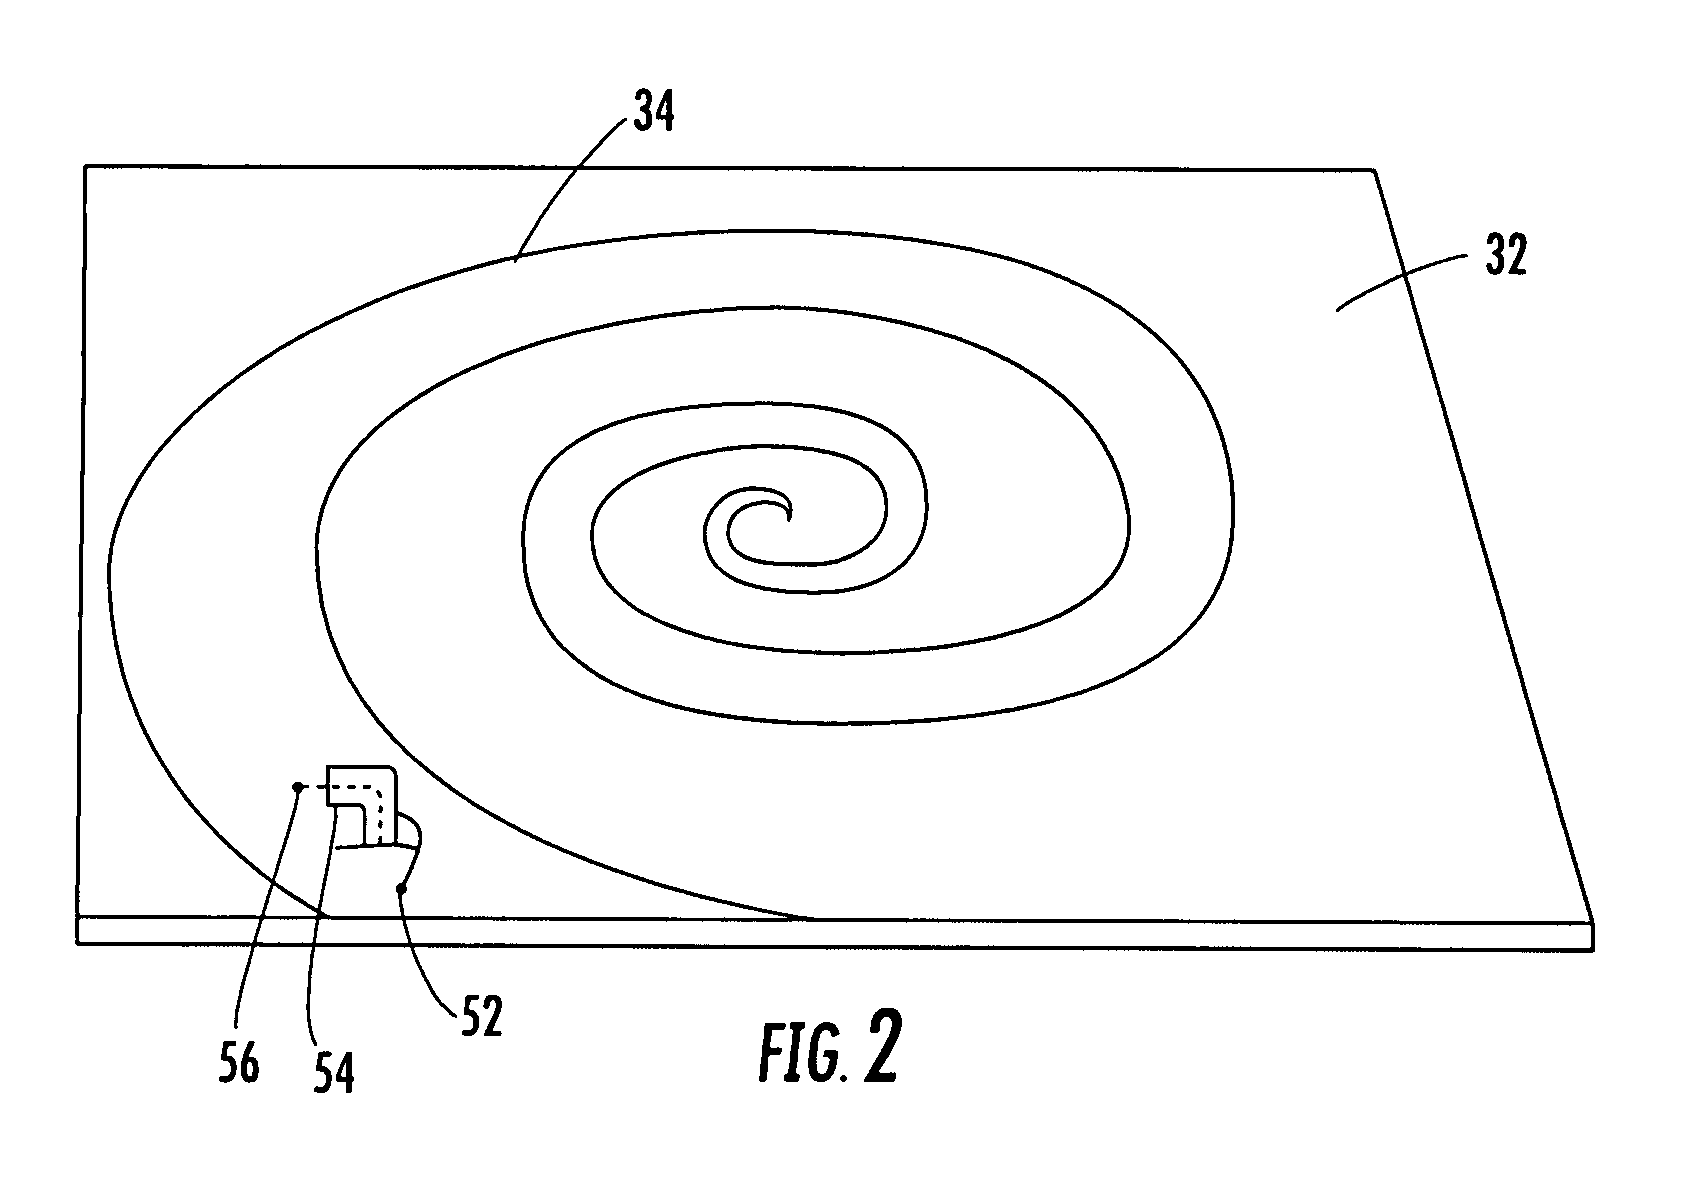 Hybrid antenna including spiral antenna and periodic array, and associated methods